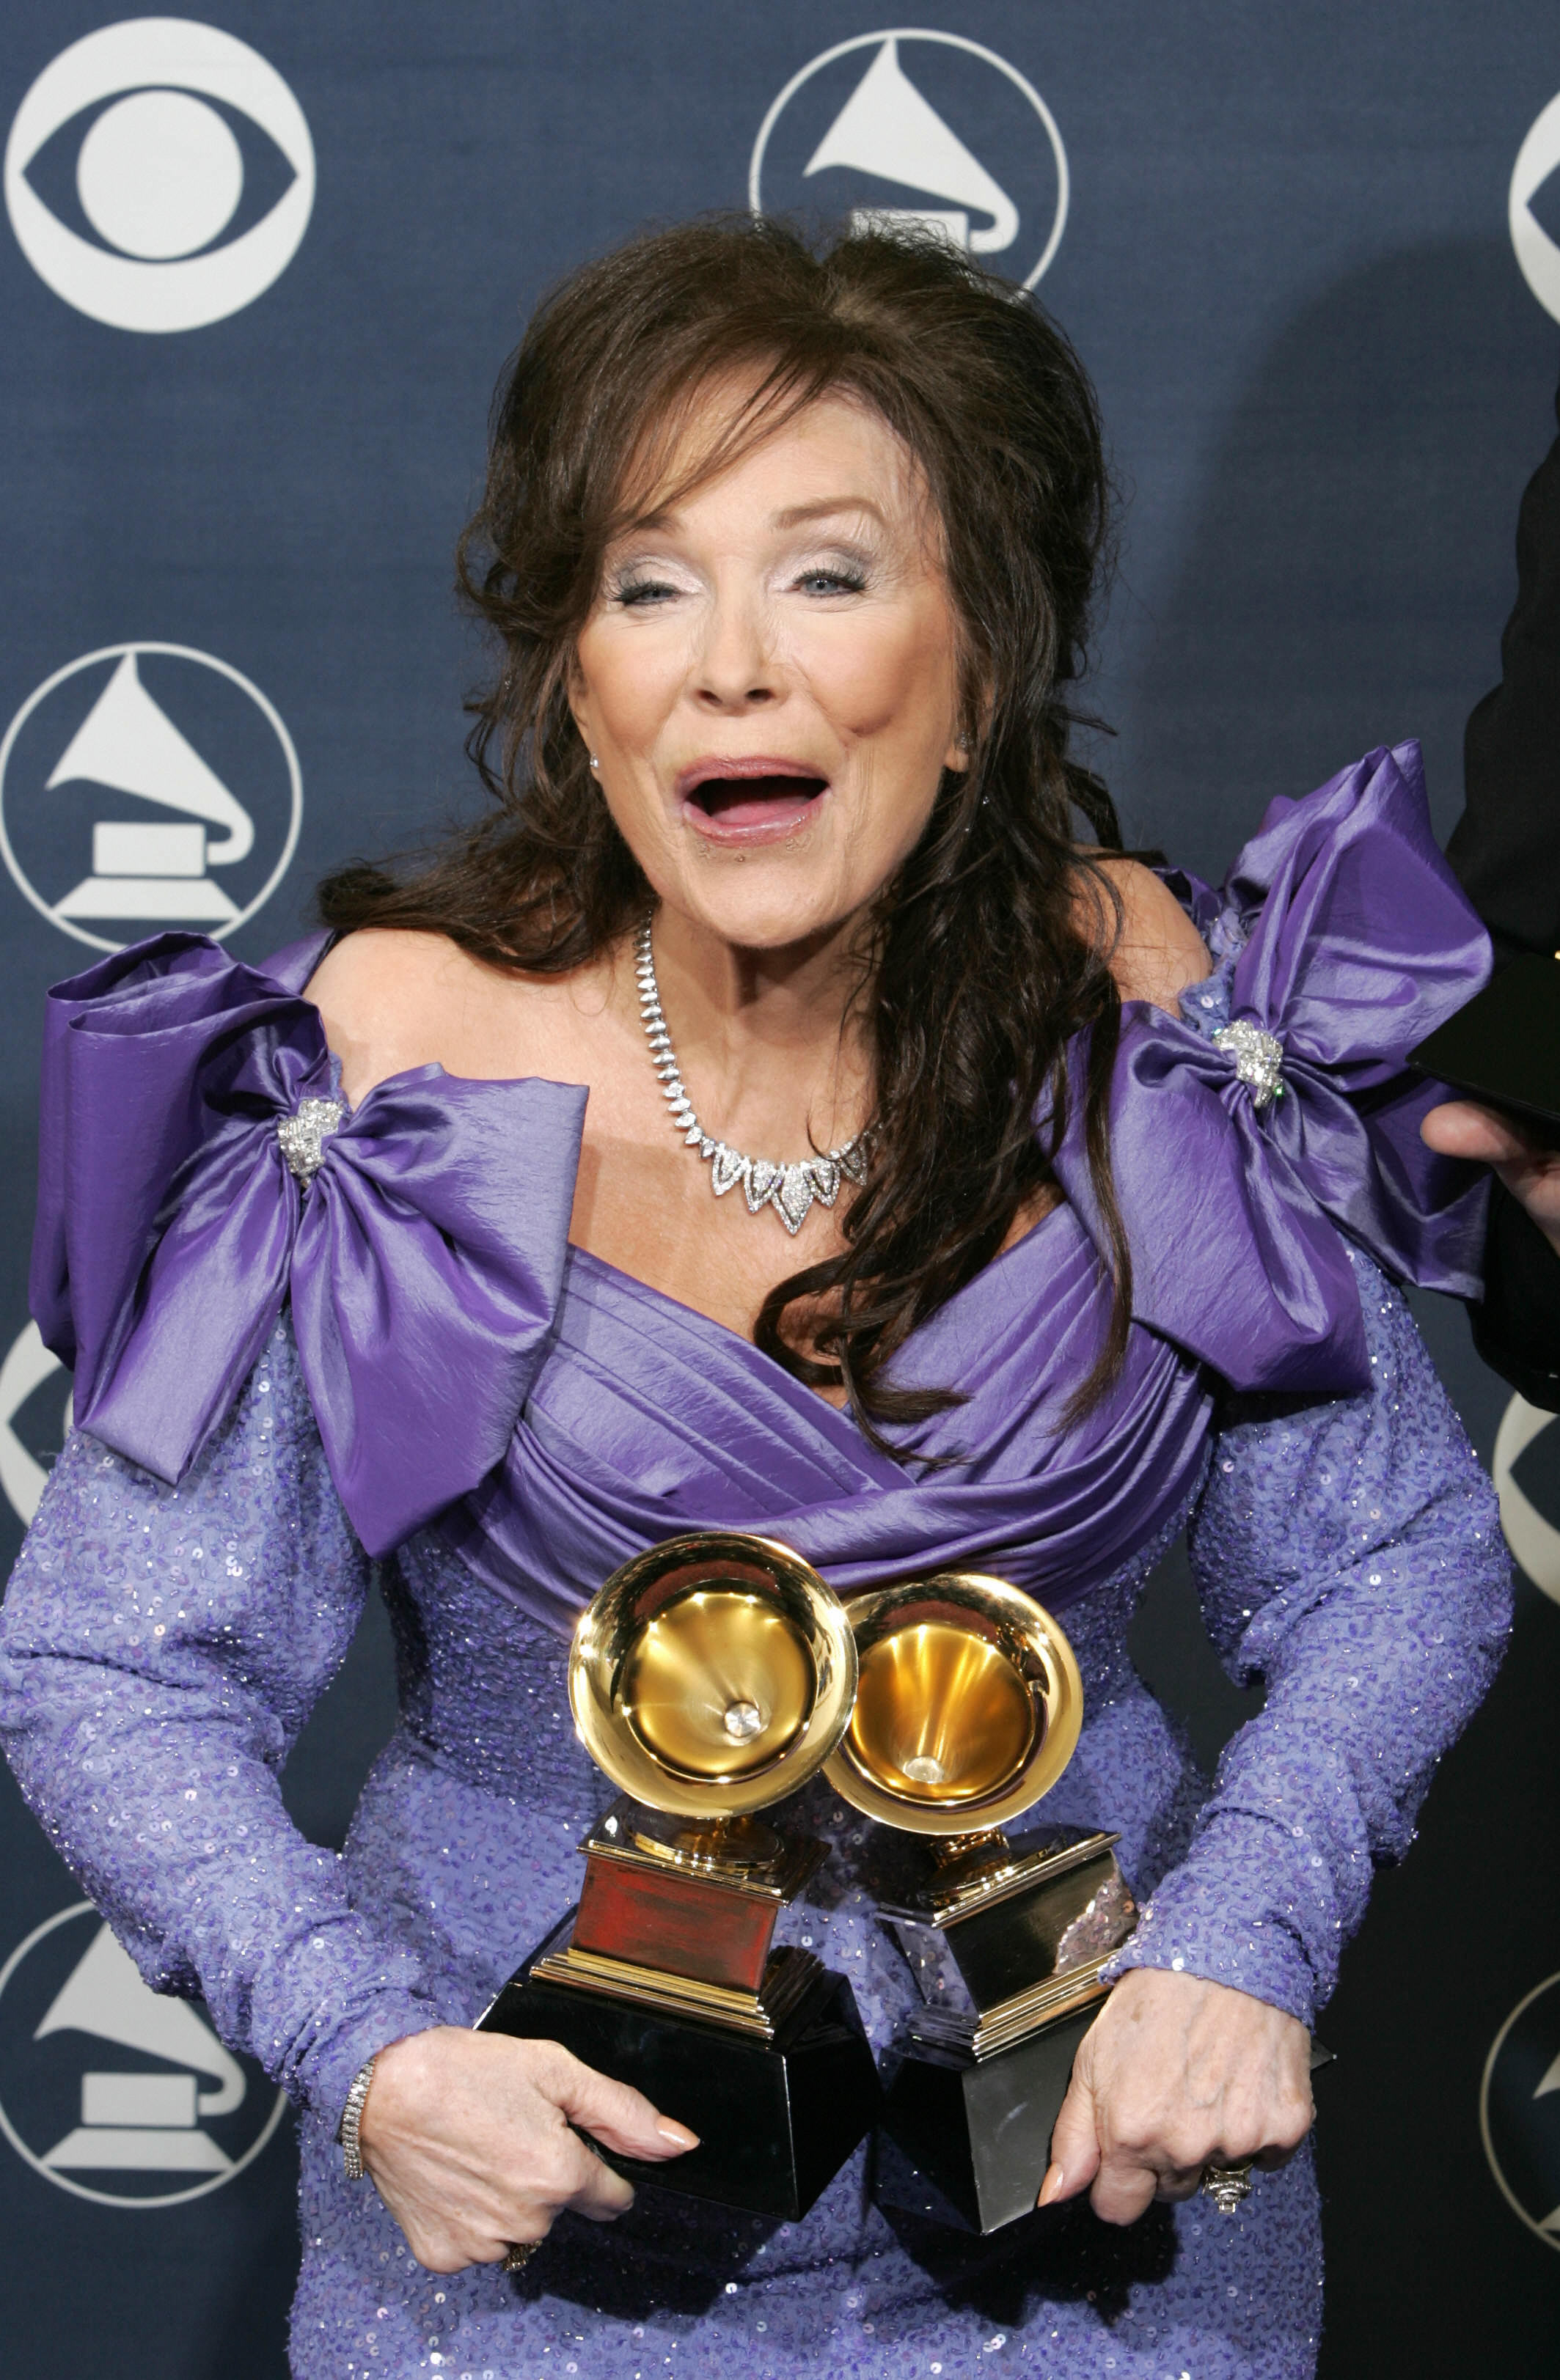 Loretta Lynn poses with the awards she won at the Grammys ceremony in Los Angeles on February 13, 2005. | Source: Getty Images